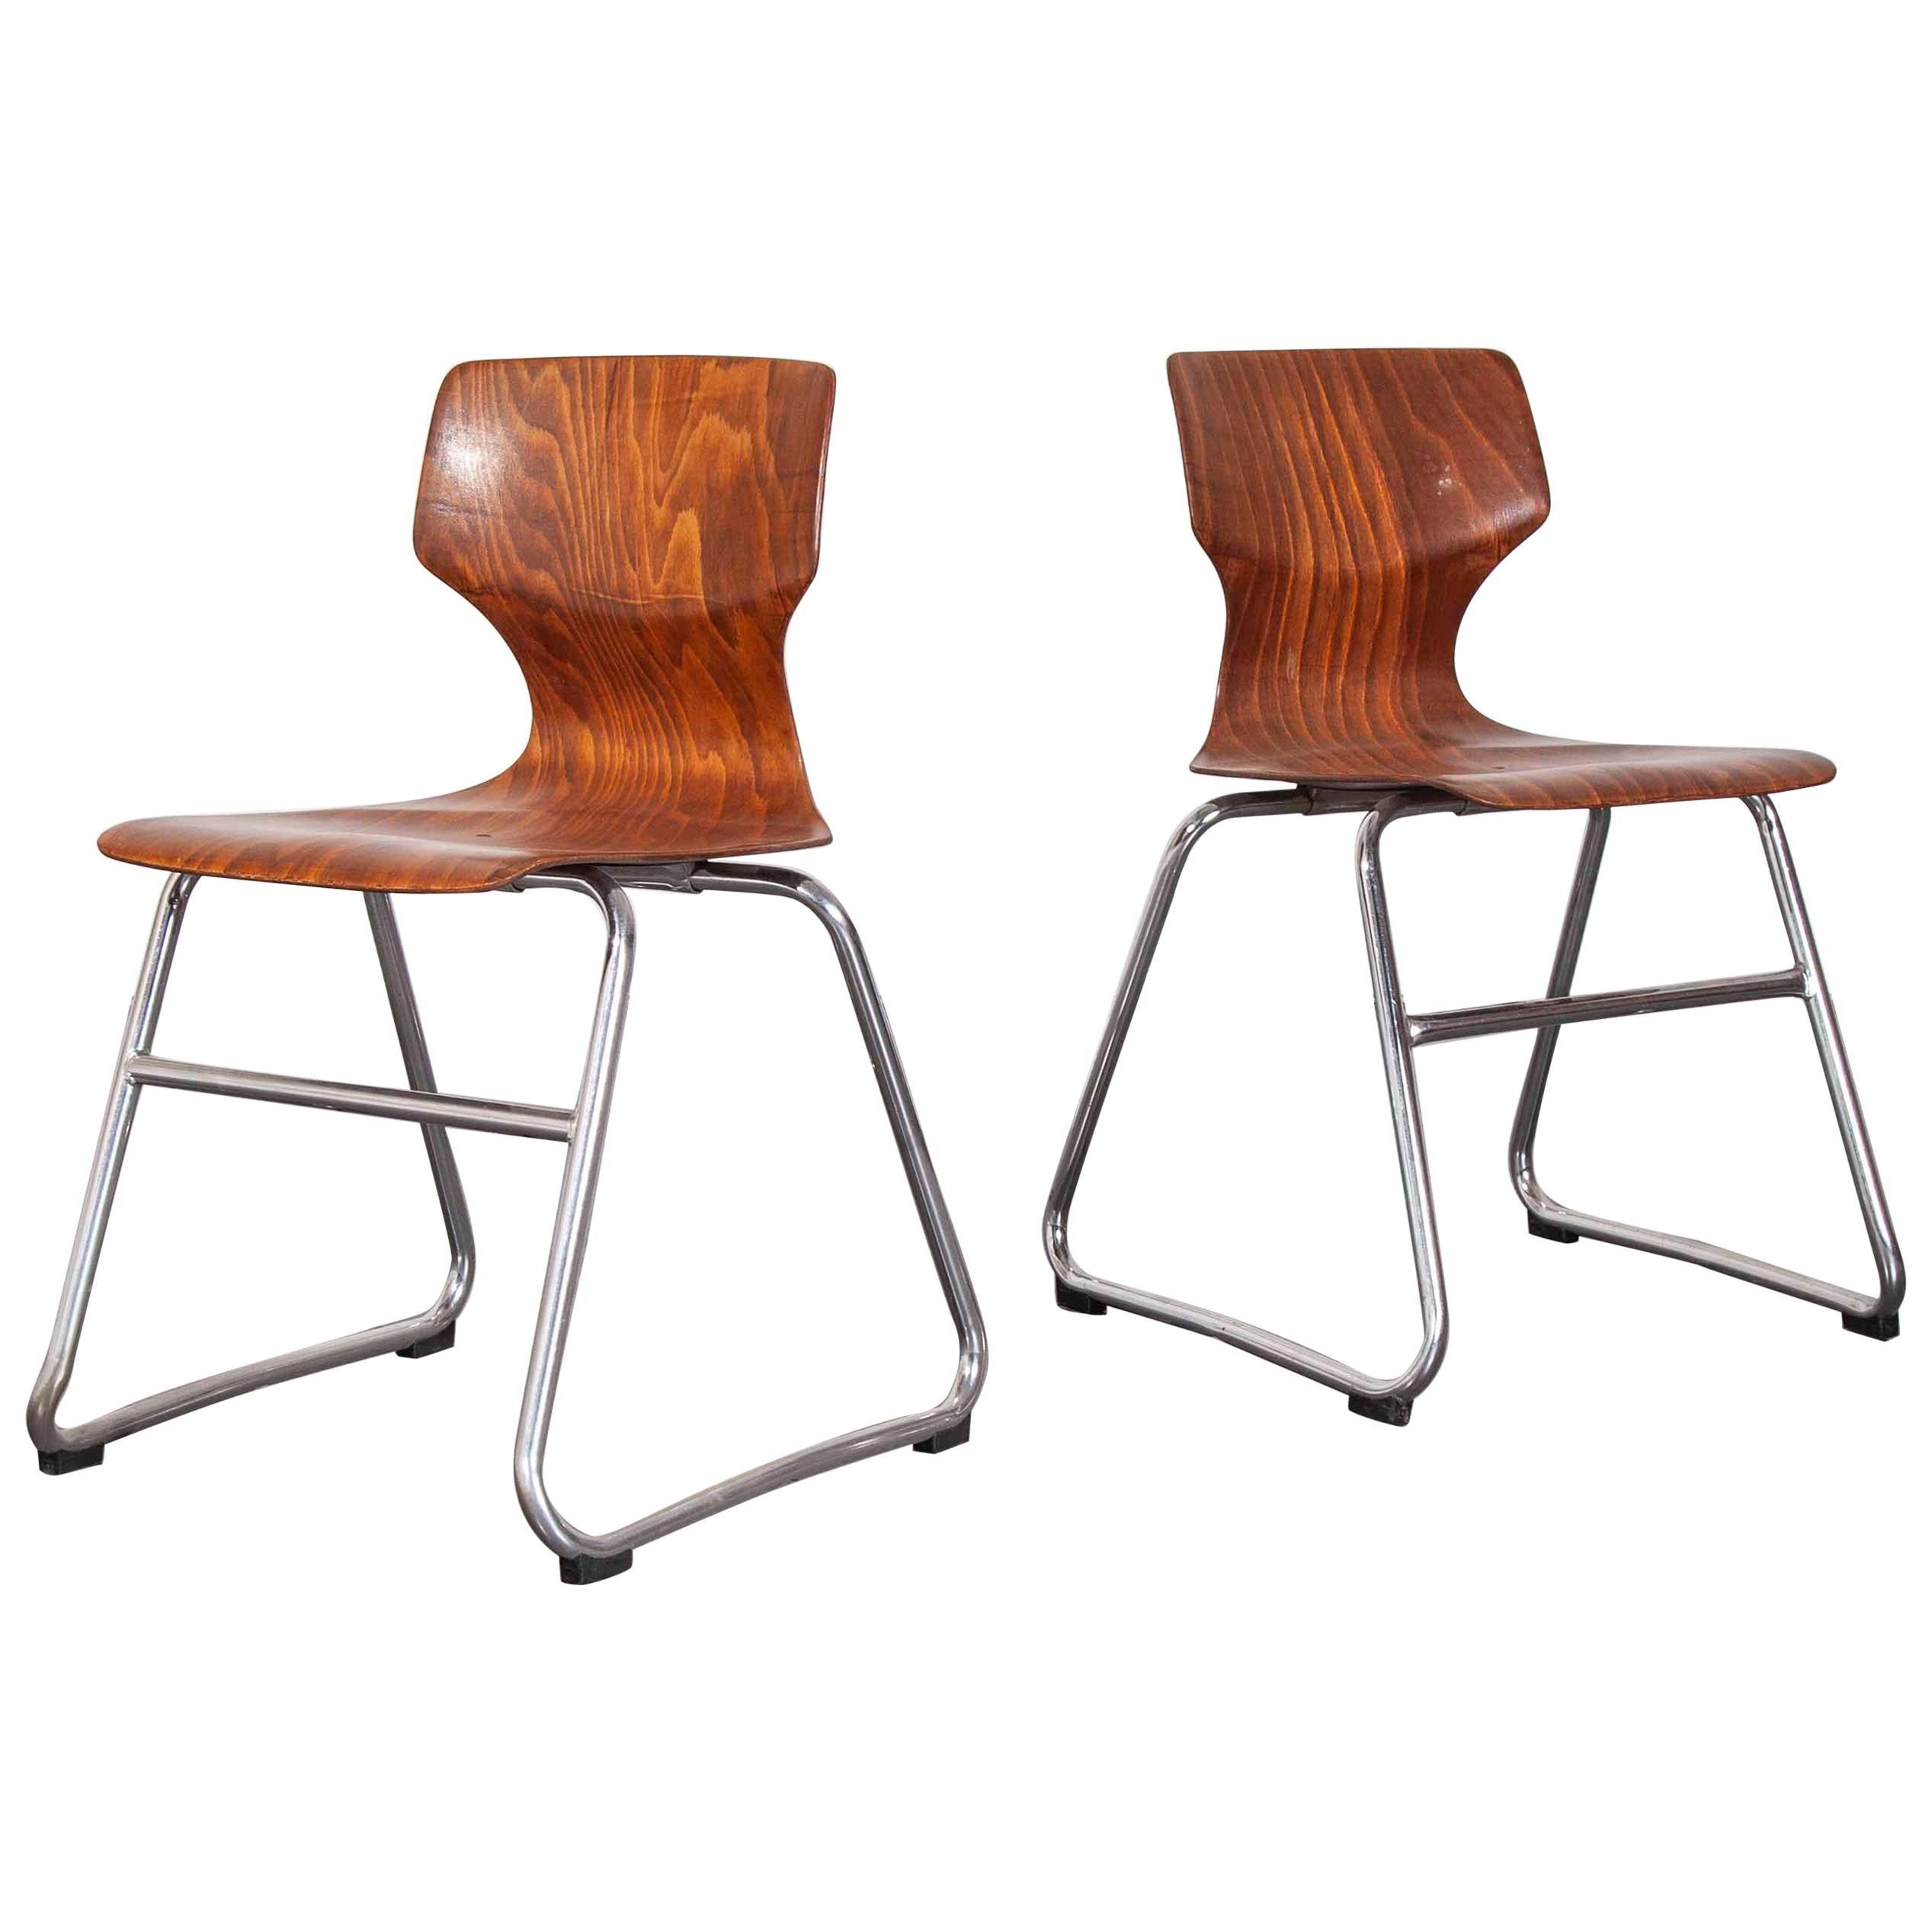 1960s Pair of Pagholz Dining Chairs Laminated Hardwood and Chrome Legs